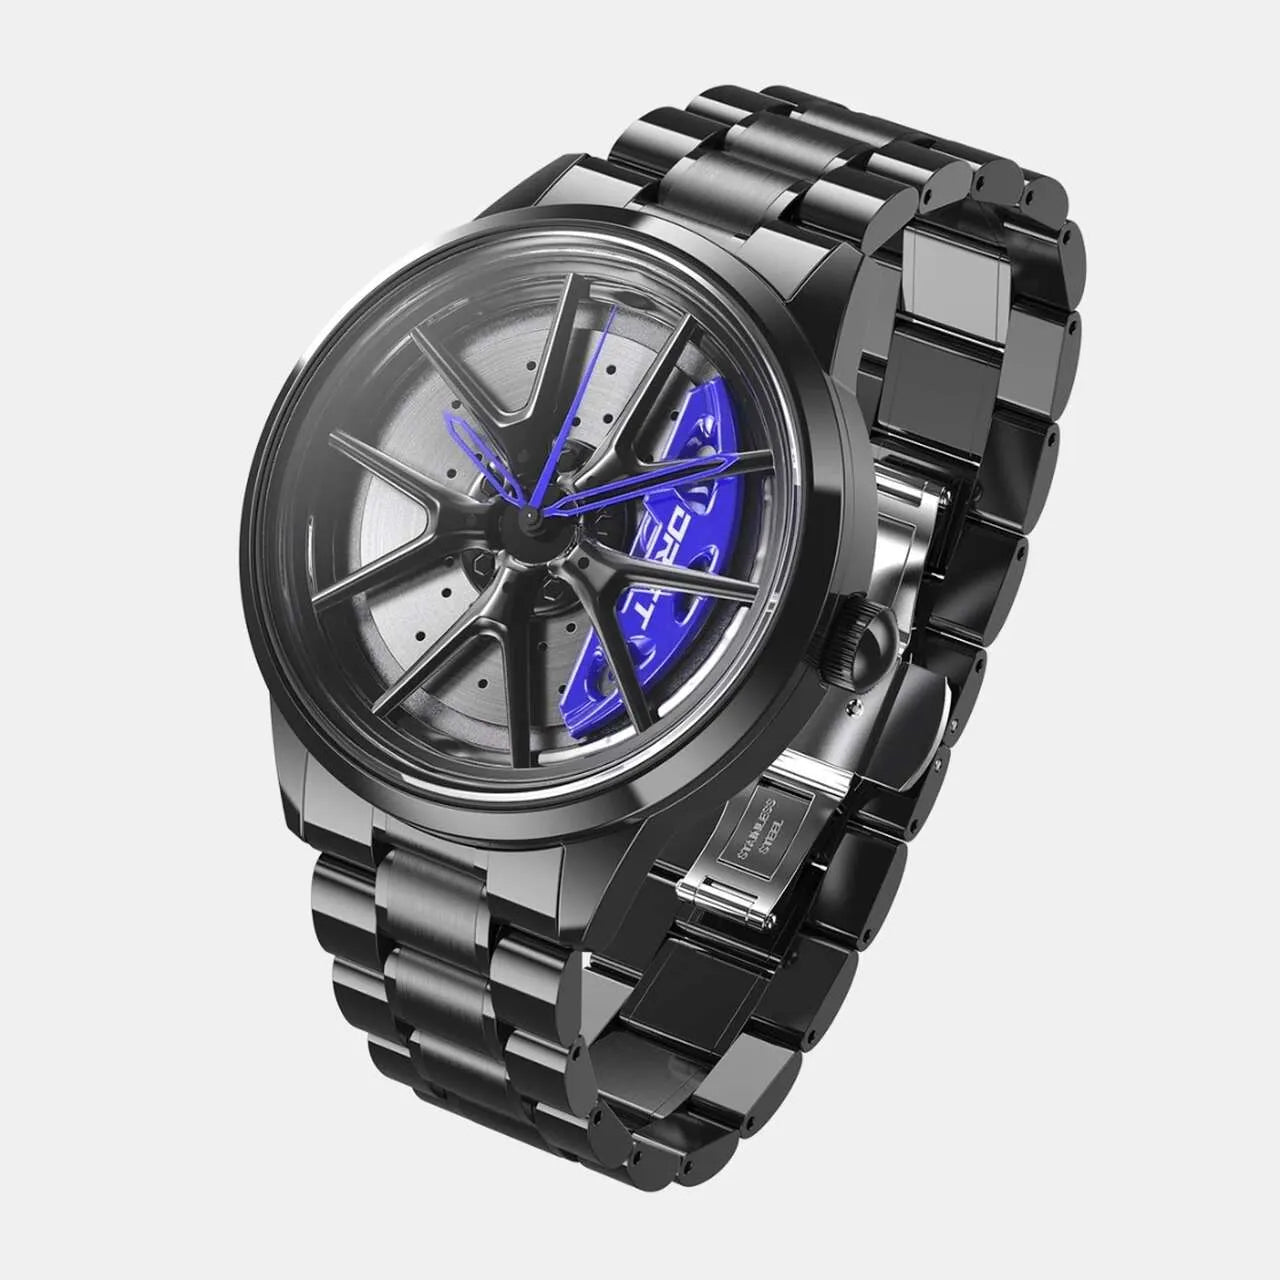 Rev up your style with our dynamic blue Nitro Rim Watch! Crafted by a German startup, these precision watches are made to captivate motorsport, tuning, and auto enthusiasts. Prepare to ignite your passion! #id_46744364286282